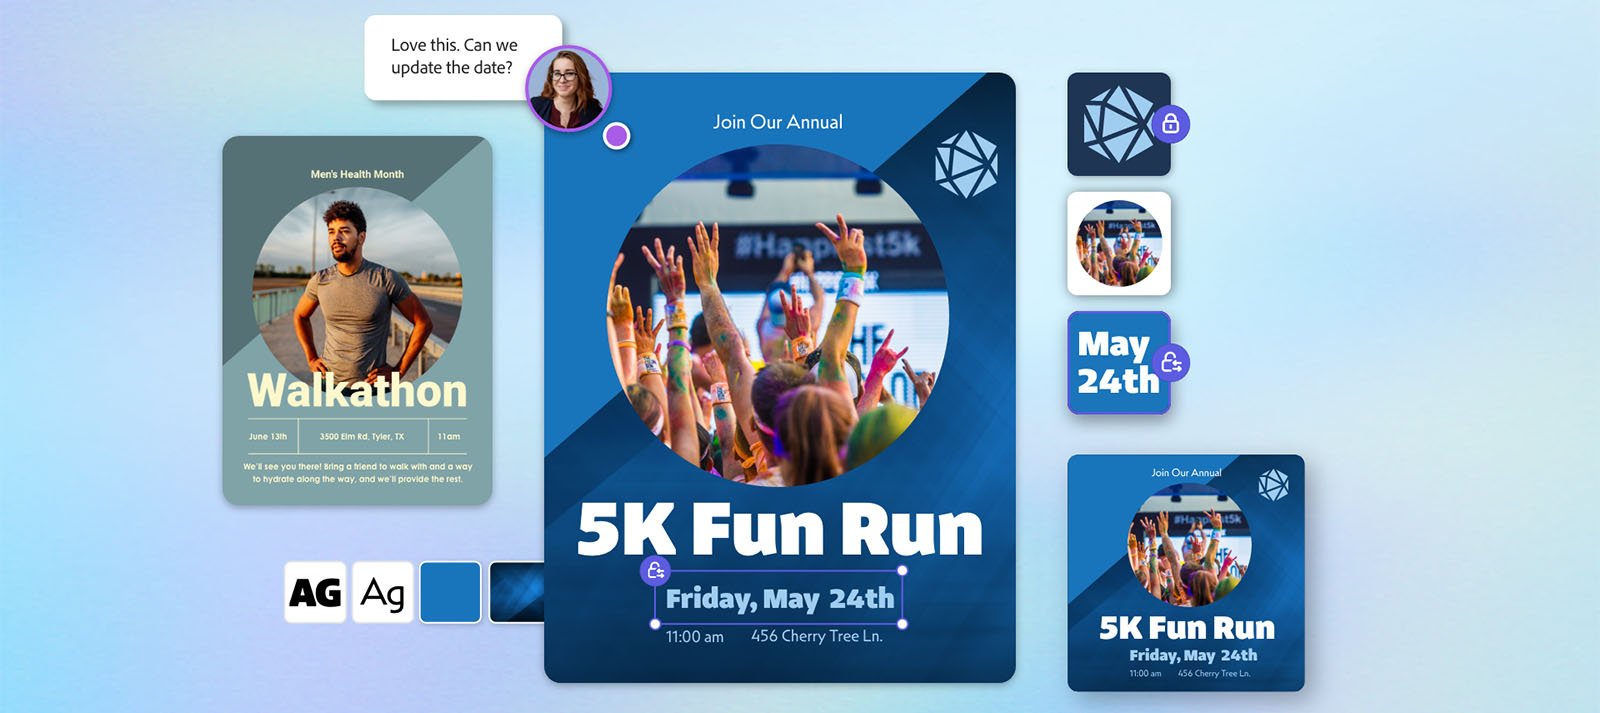 A promotional collage featuring a "5K Fun Run" event on Friday, May 24th at 11:00 am. Central image shows a crowd of people with hands raised. Side images include "Walkathon," text overlay suggestions, and design elements such as date and event graphics.